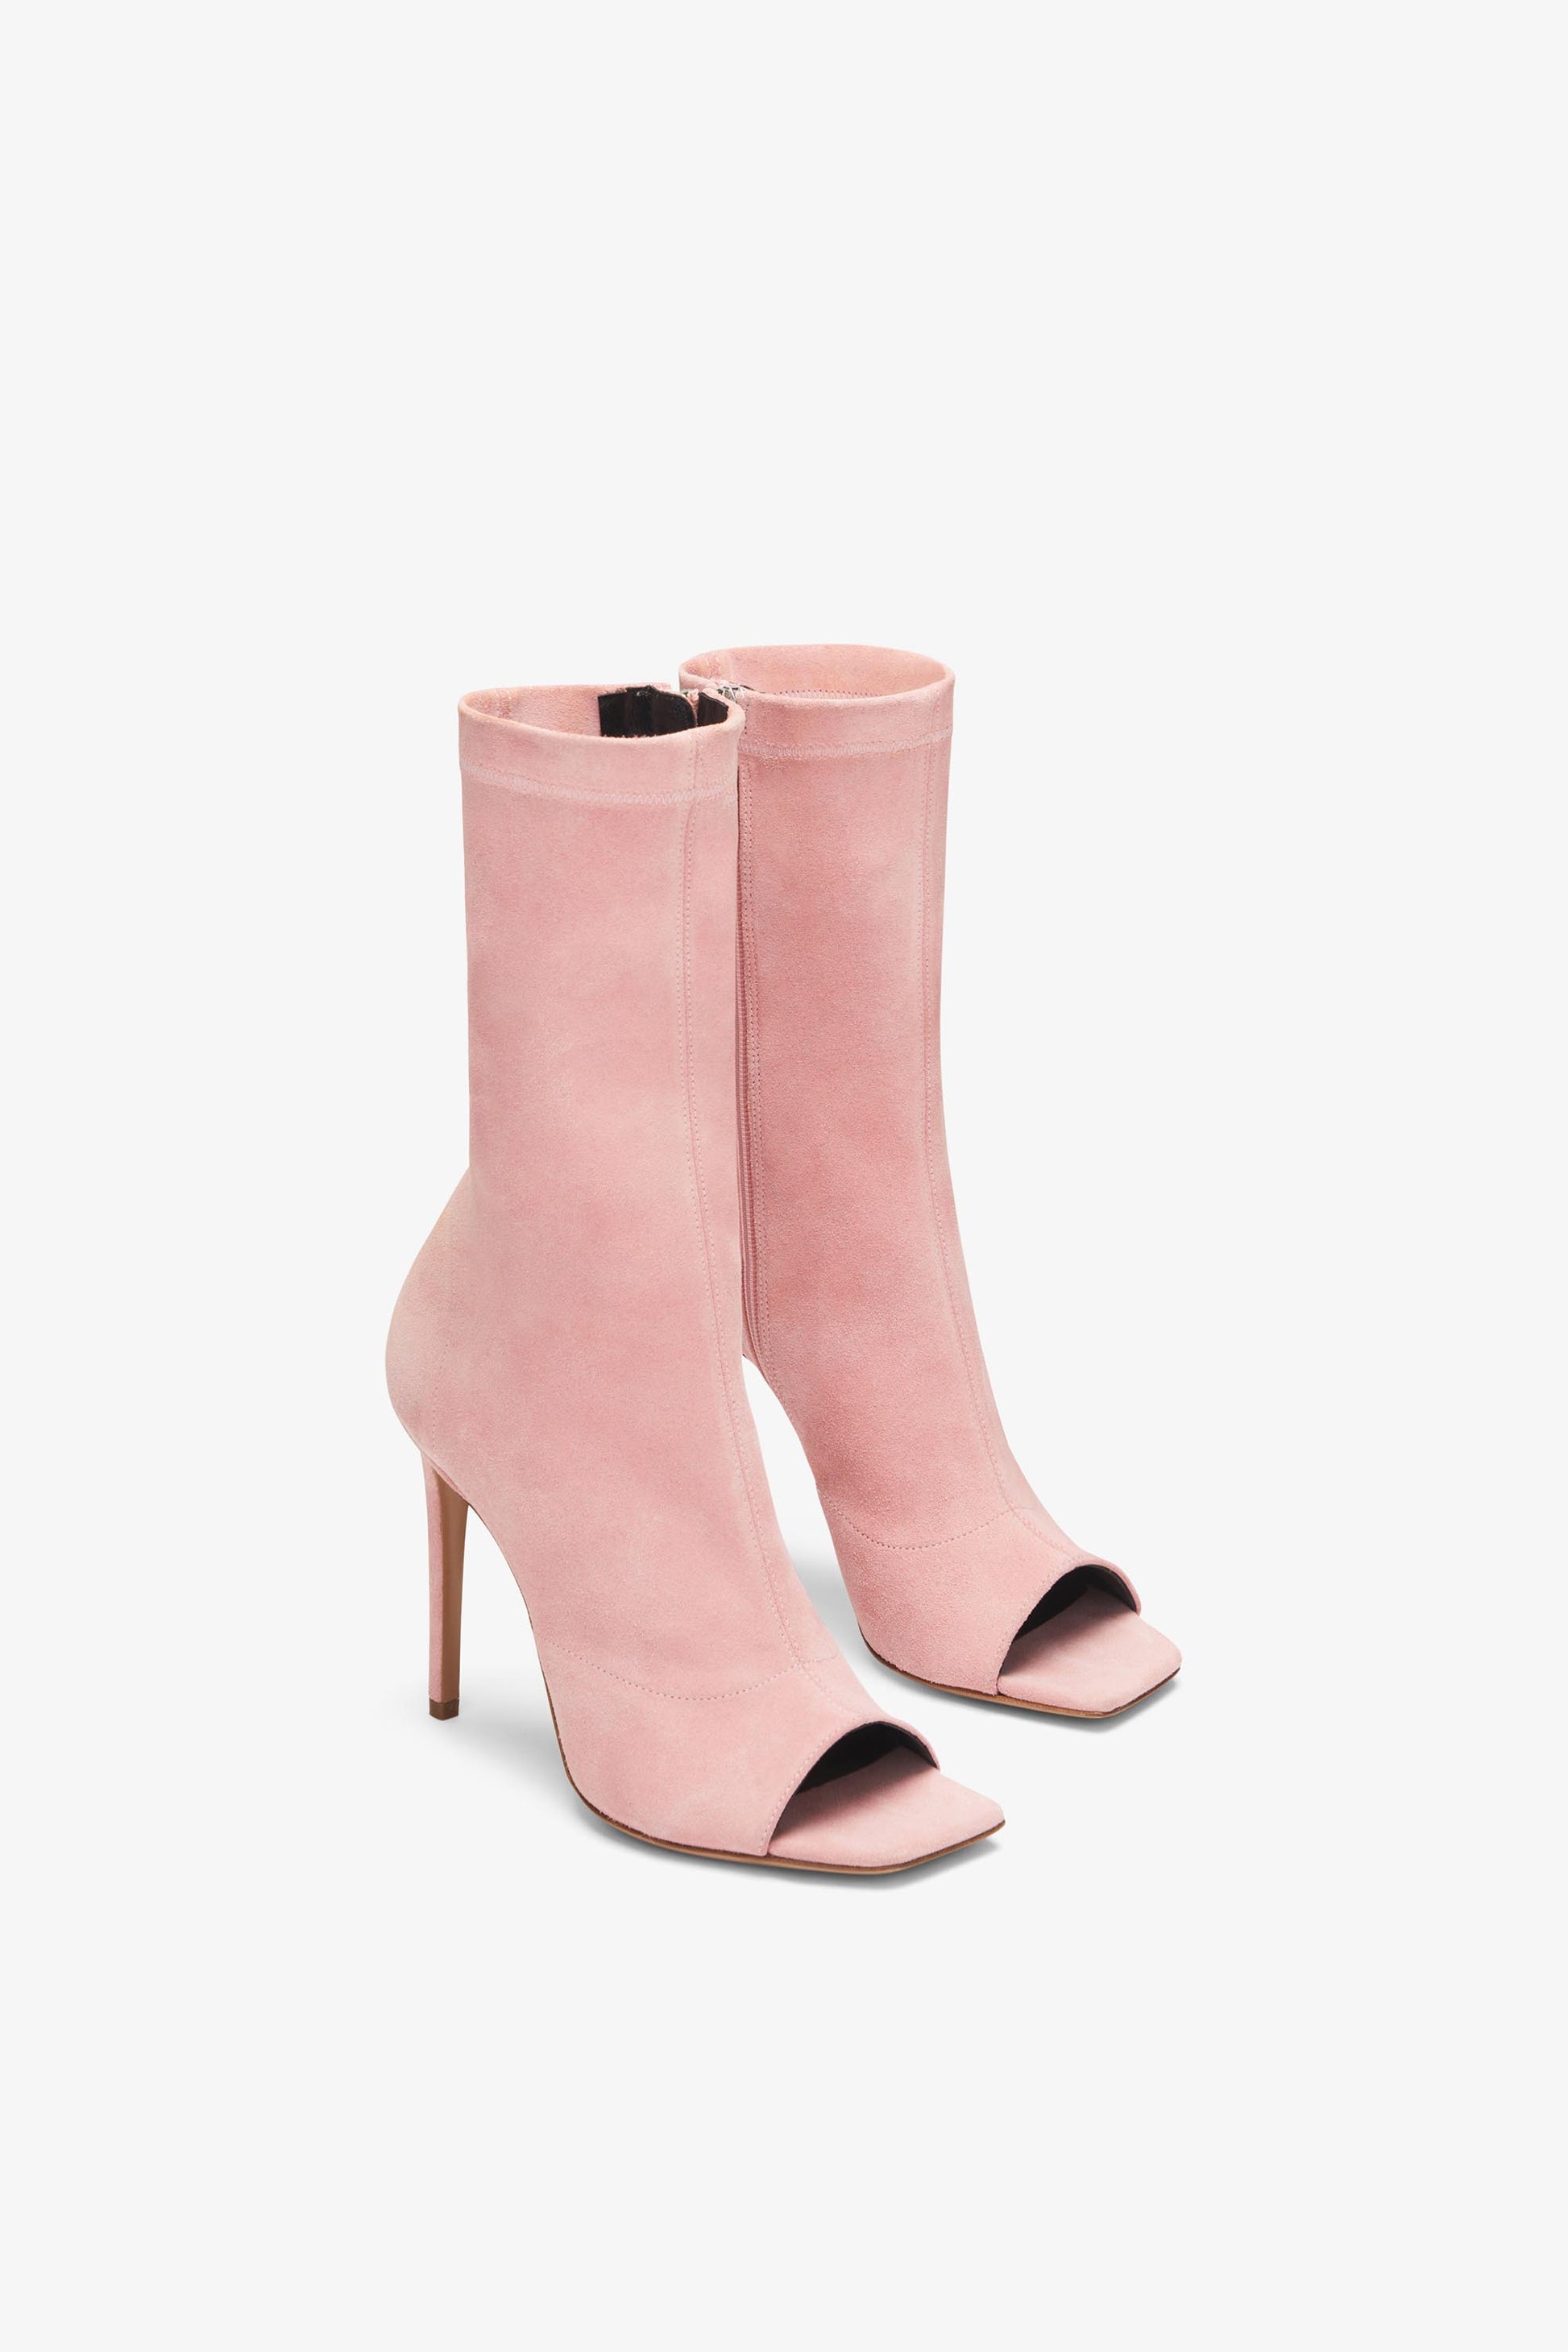 Pink stretch suede ankle boot